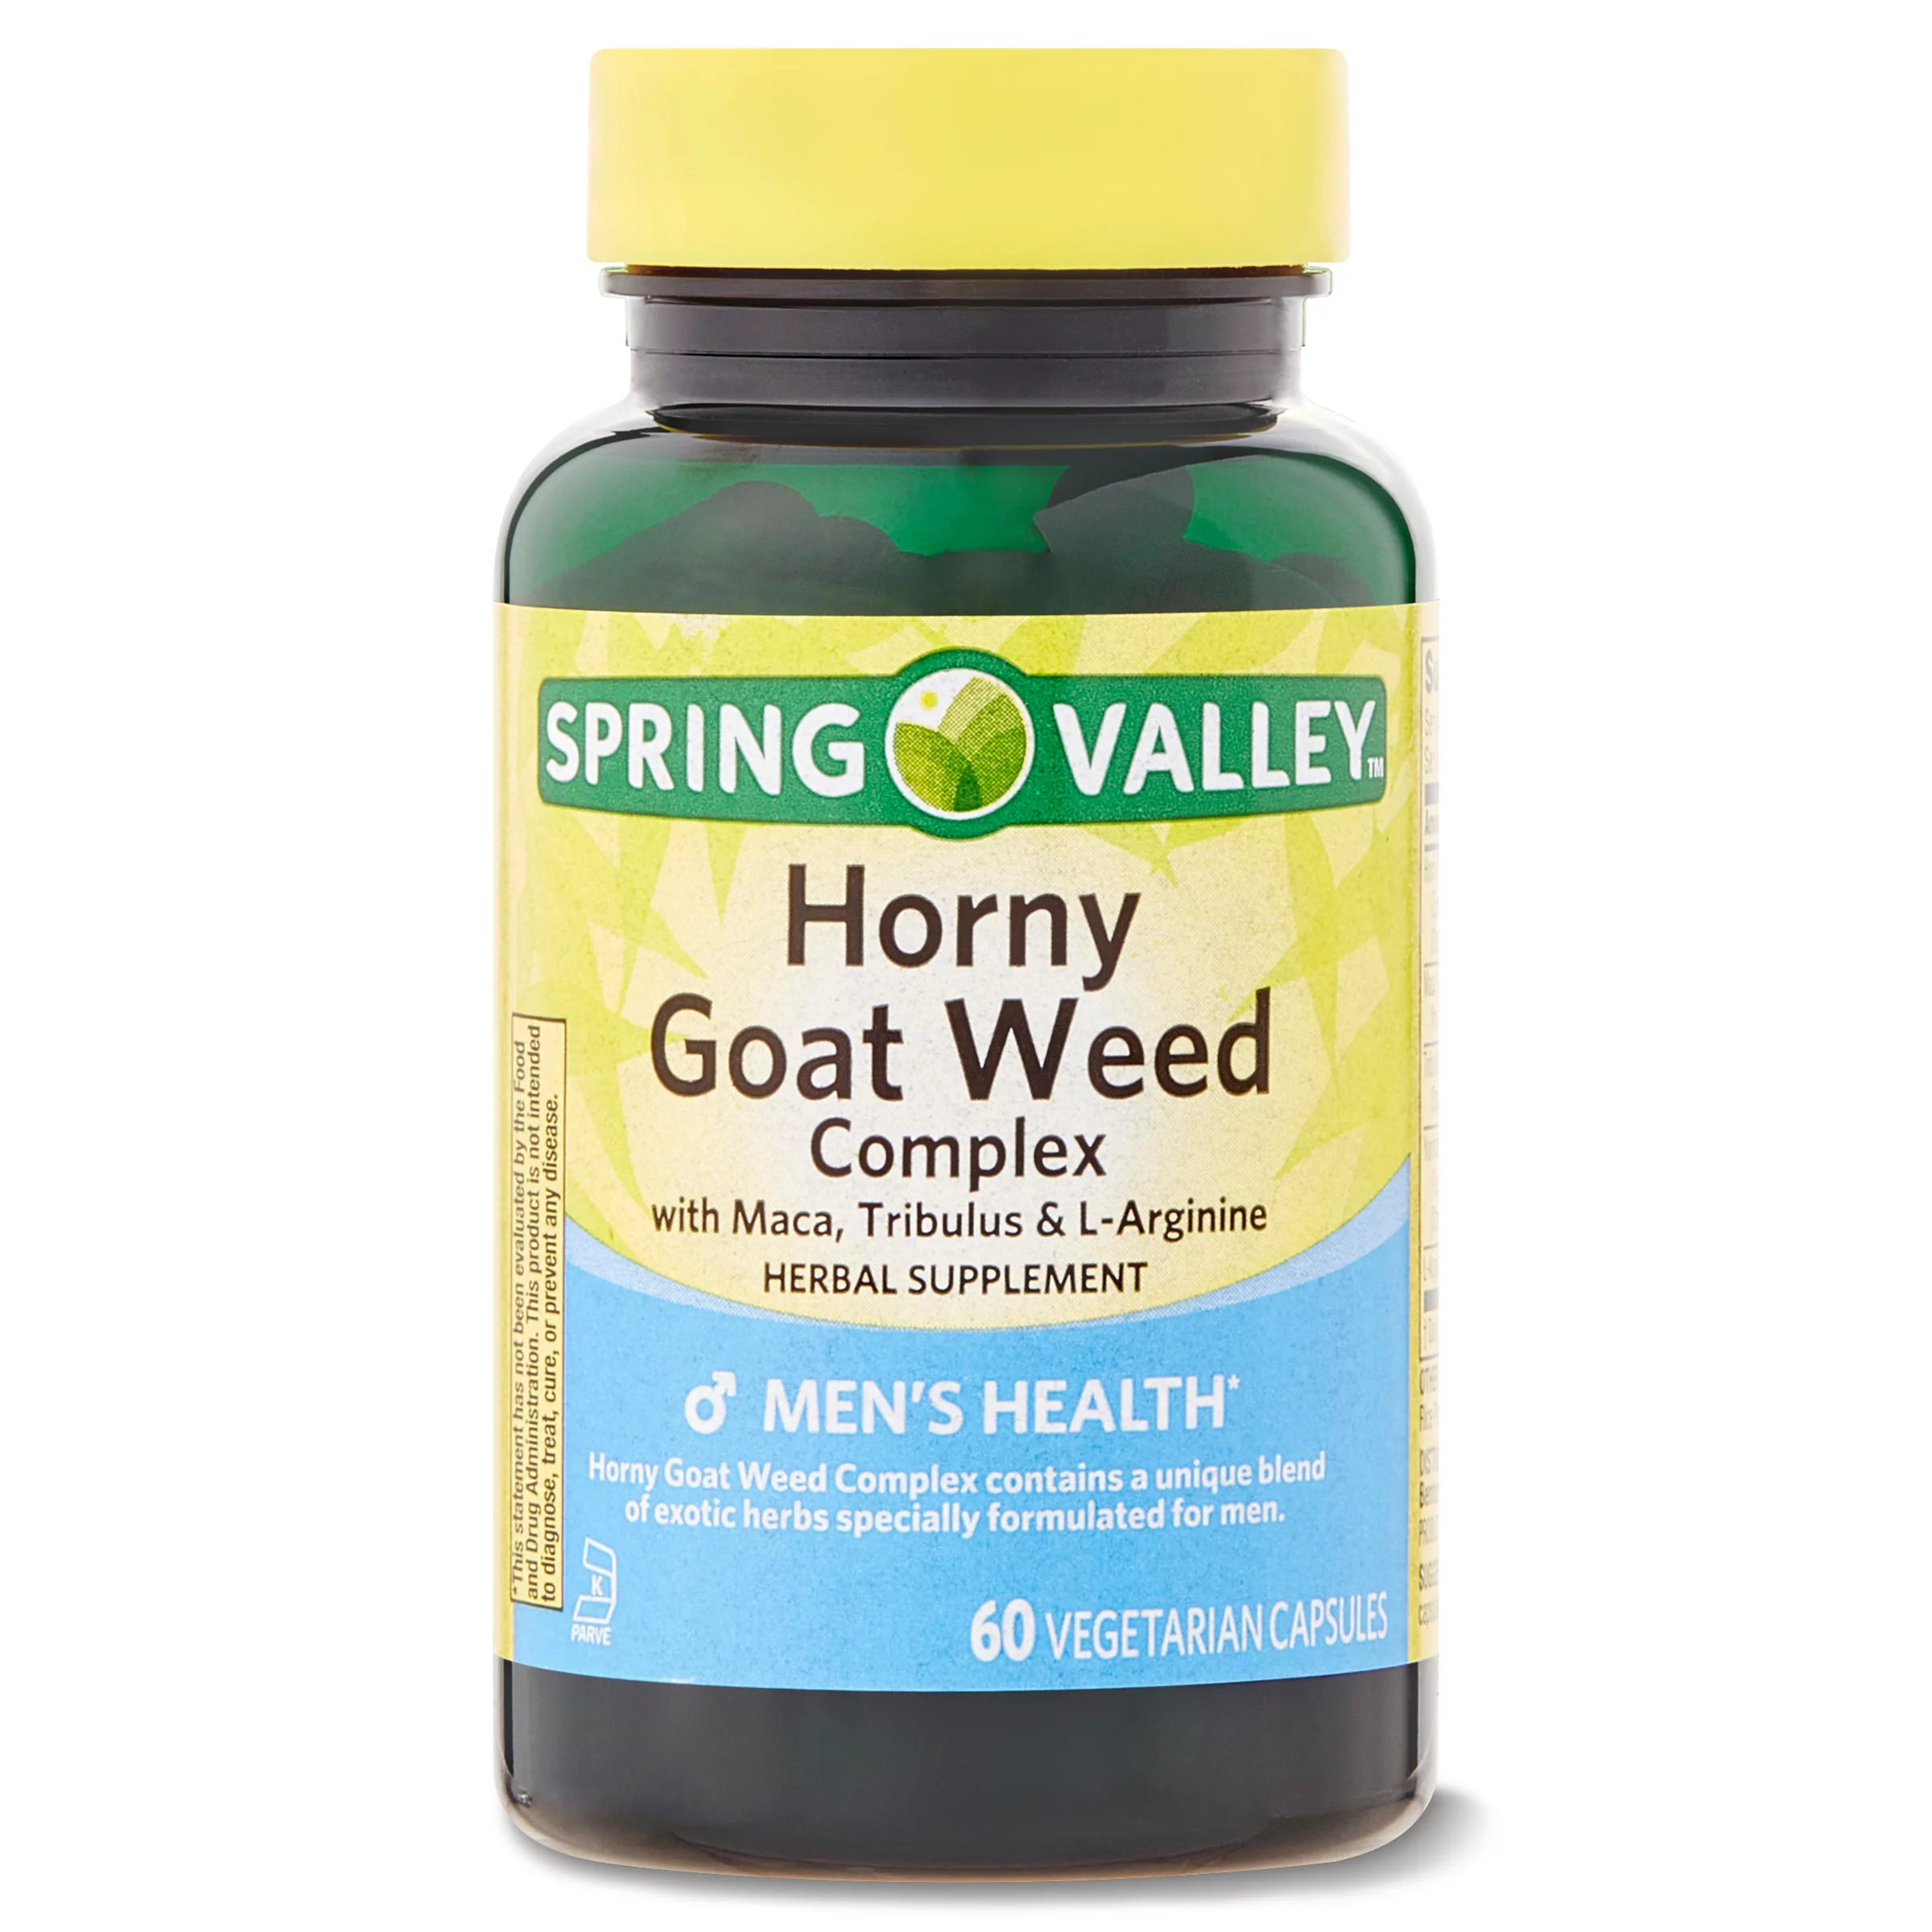 Spring Valley Horny Goat Weed Complex with Maca, Tribulus & L-Arginine Herbal Supplement, 60 Capsules